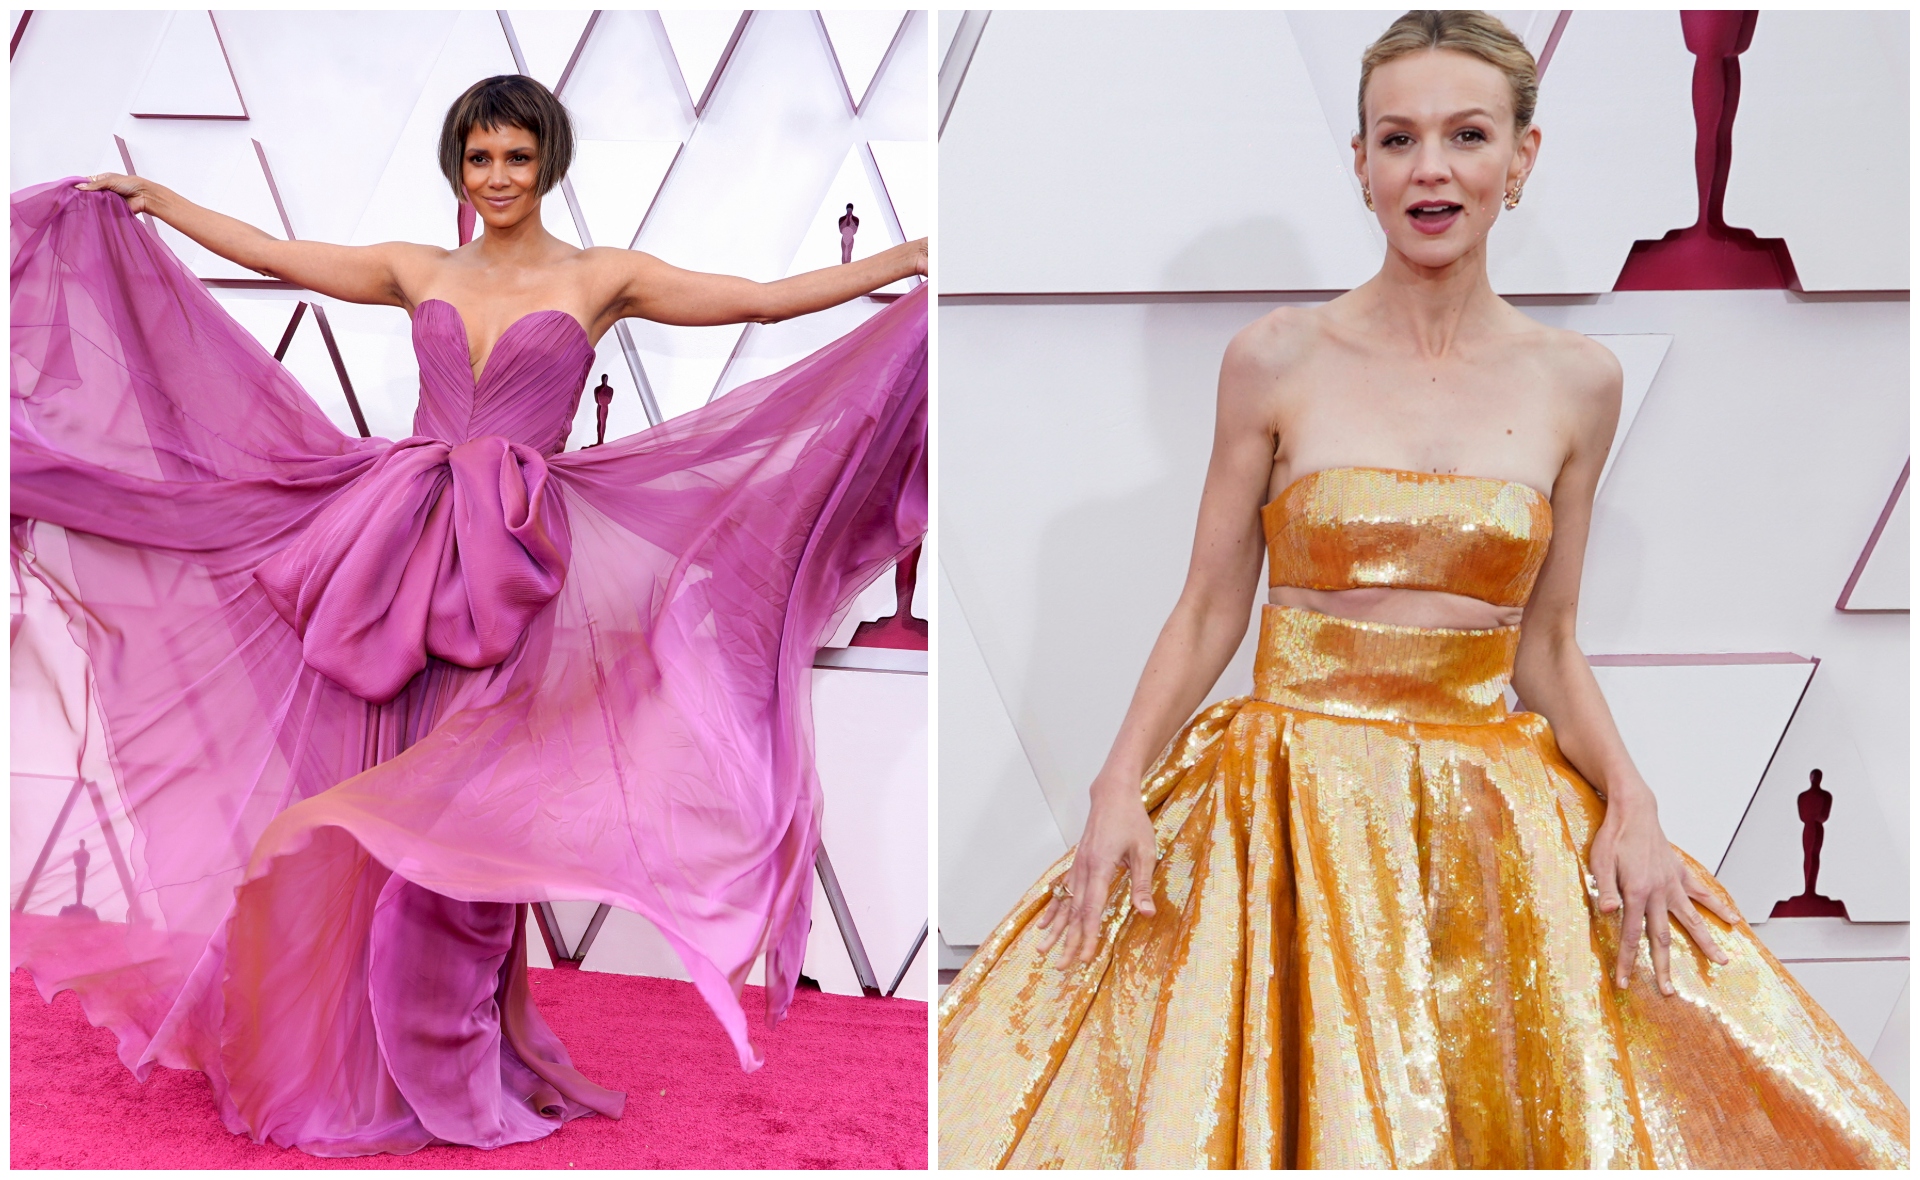 Happy Monday to you and to Carey Mulligan’s 2021 Oscars dress: This year’s red carpet is fulfilling every single one of our awards season fantasies